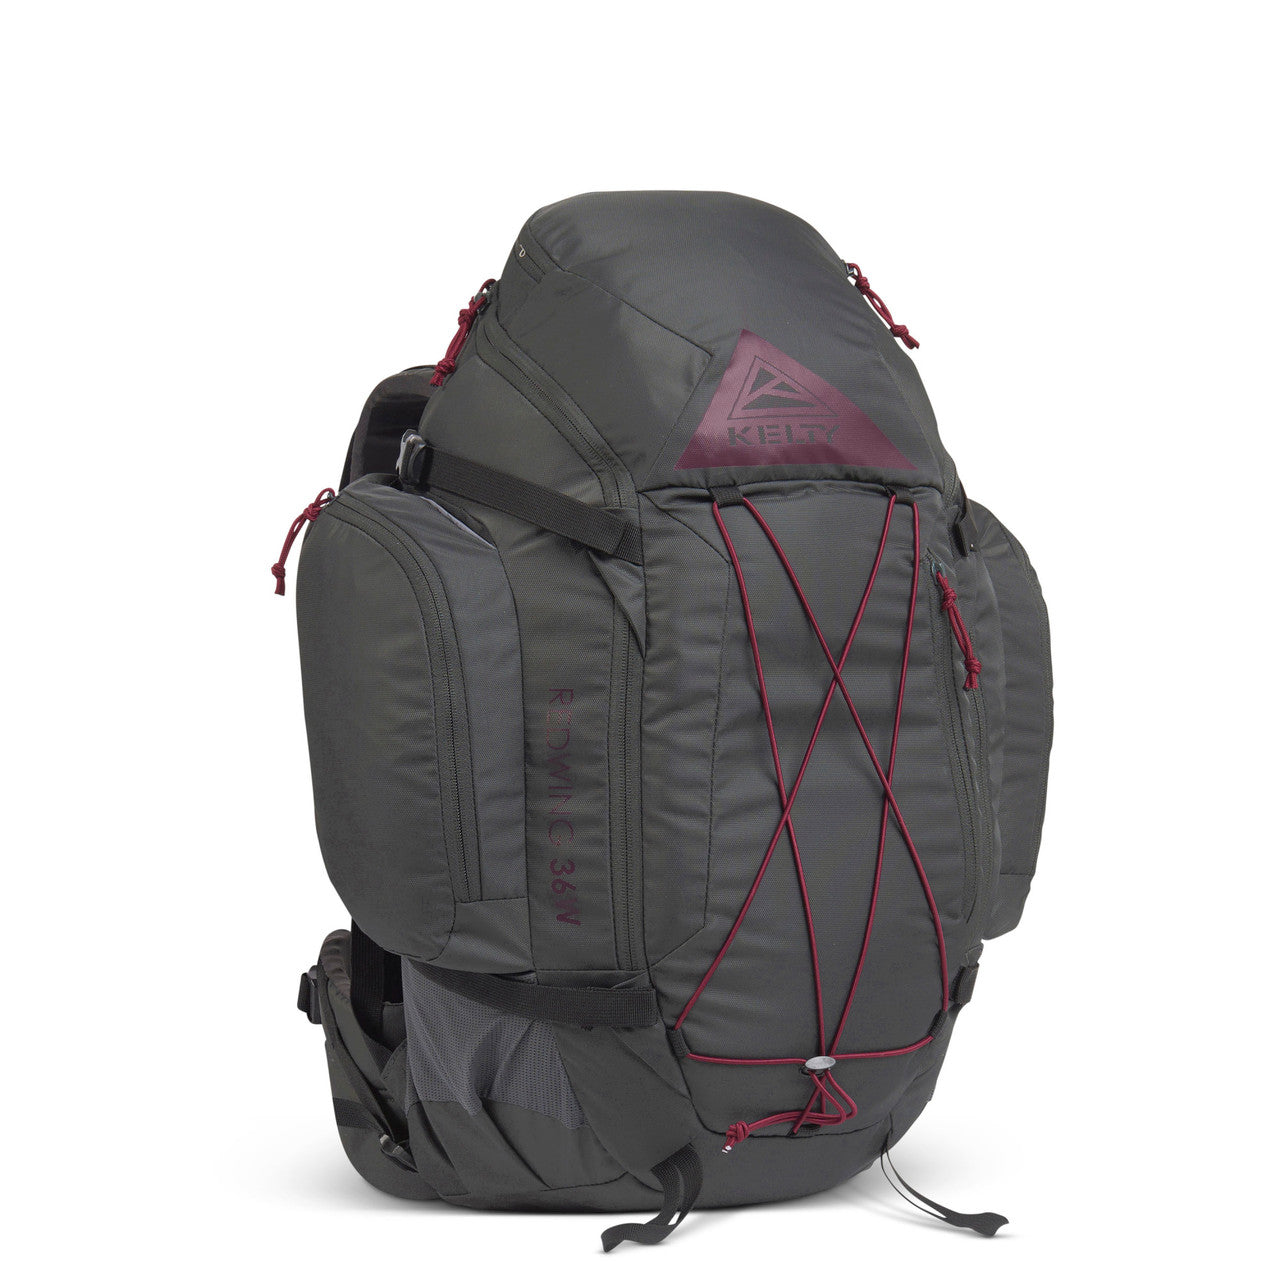 Kelty Redwing 36 Backpack